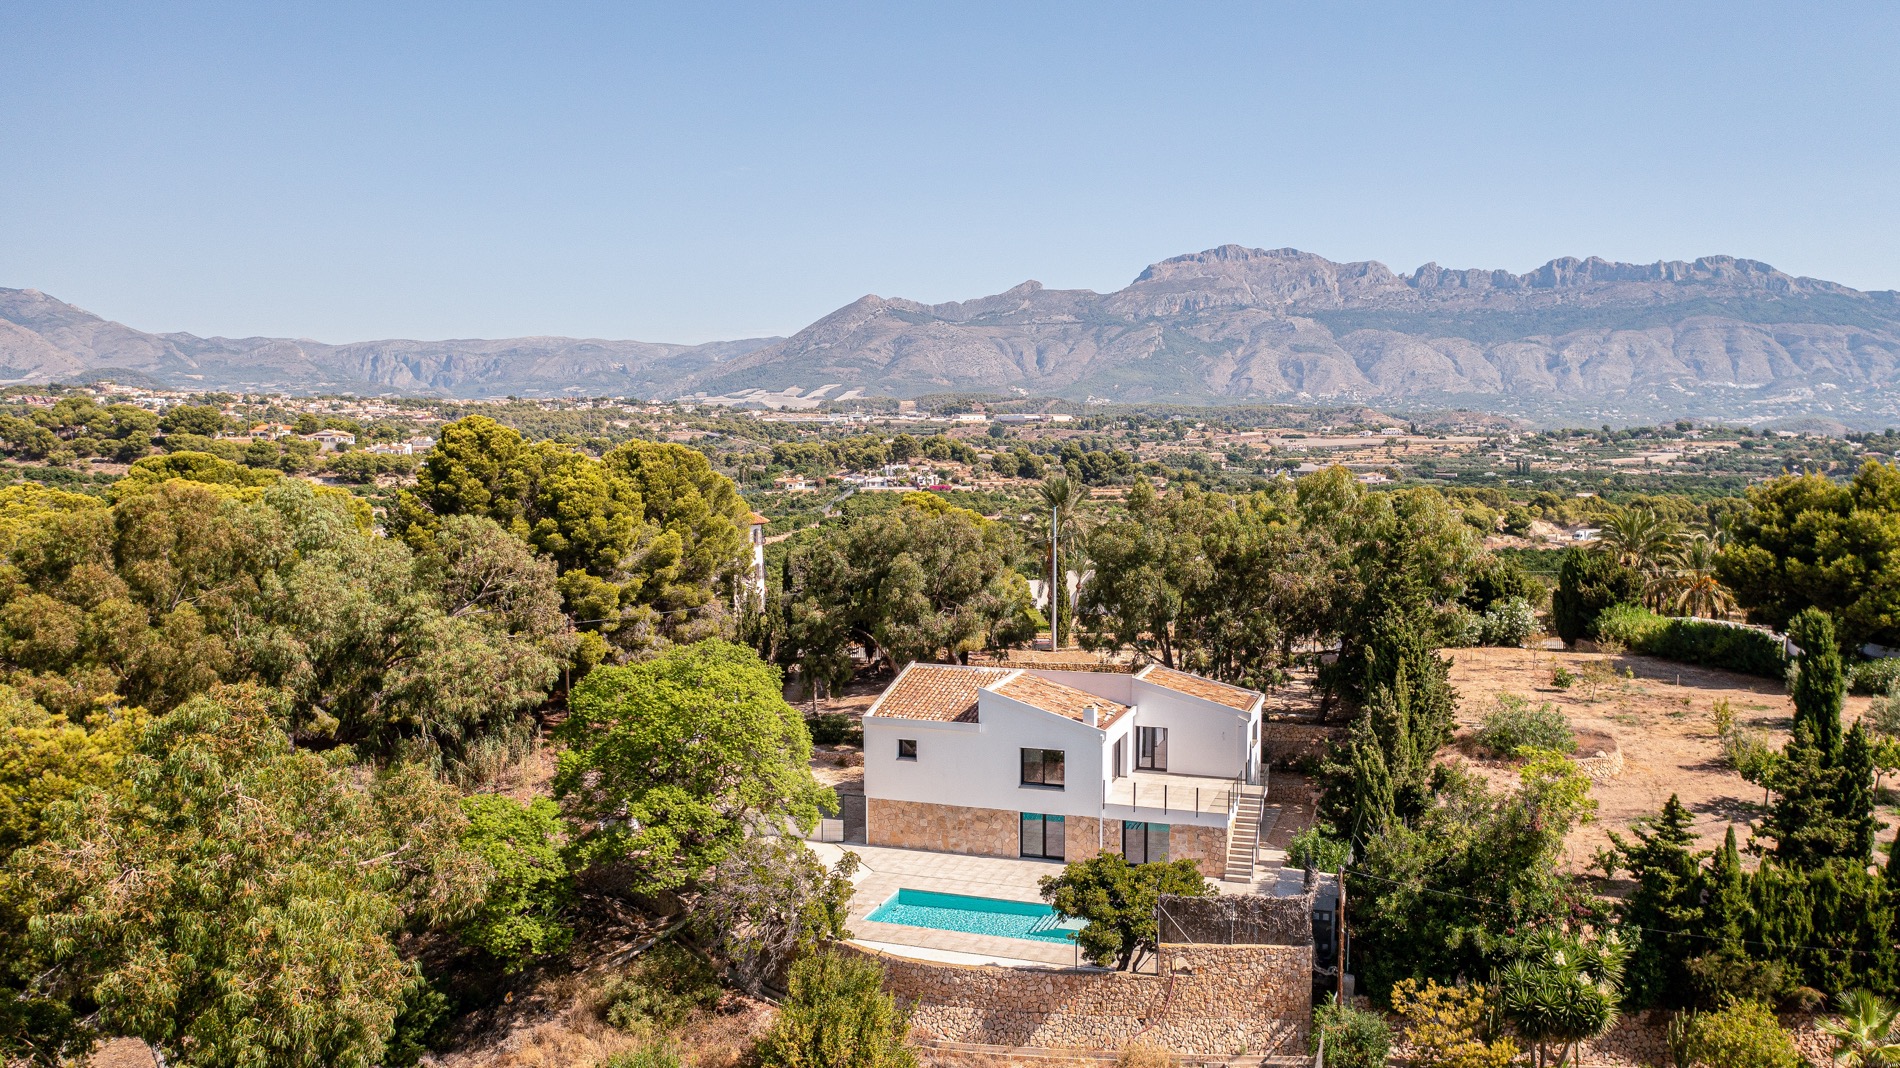 NEWLY BUILT MODERN VILLA FOR SALE IN EL PLANET -ALTEA WITH INCREDIBLE SEA VIEWS